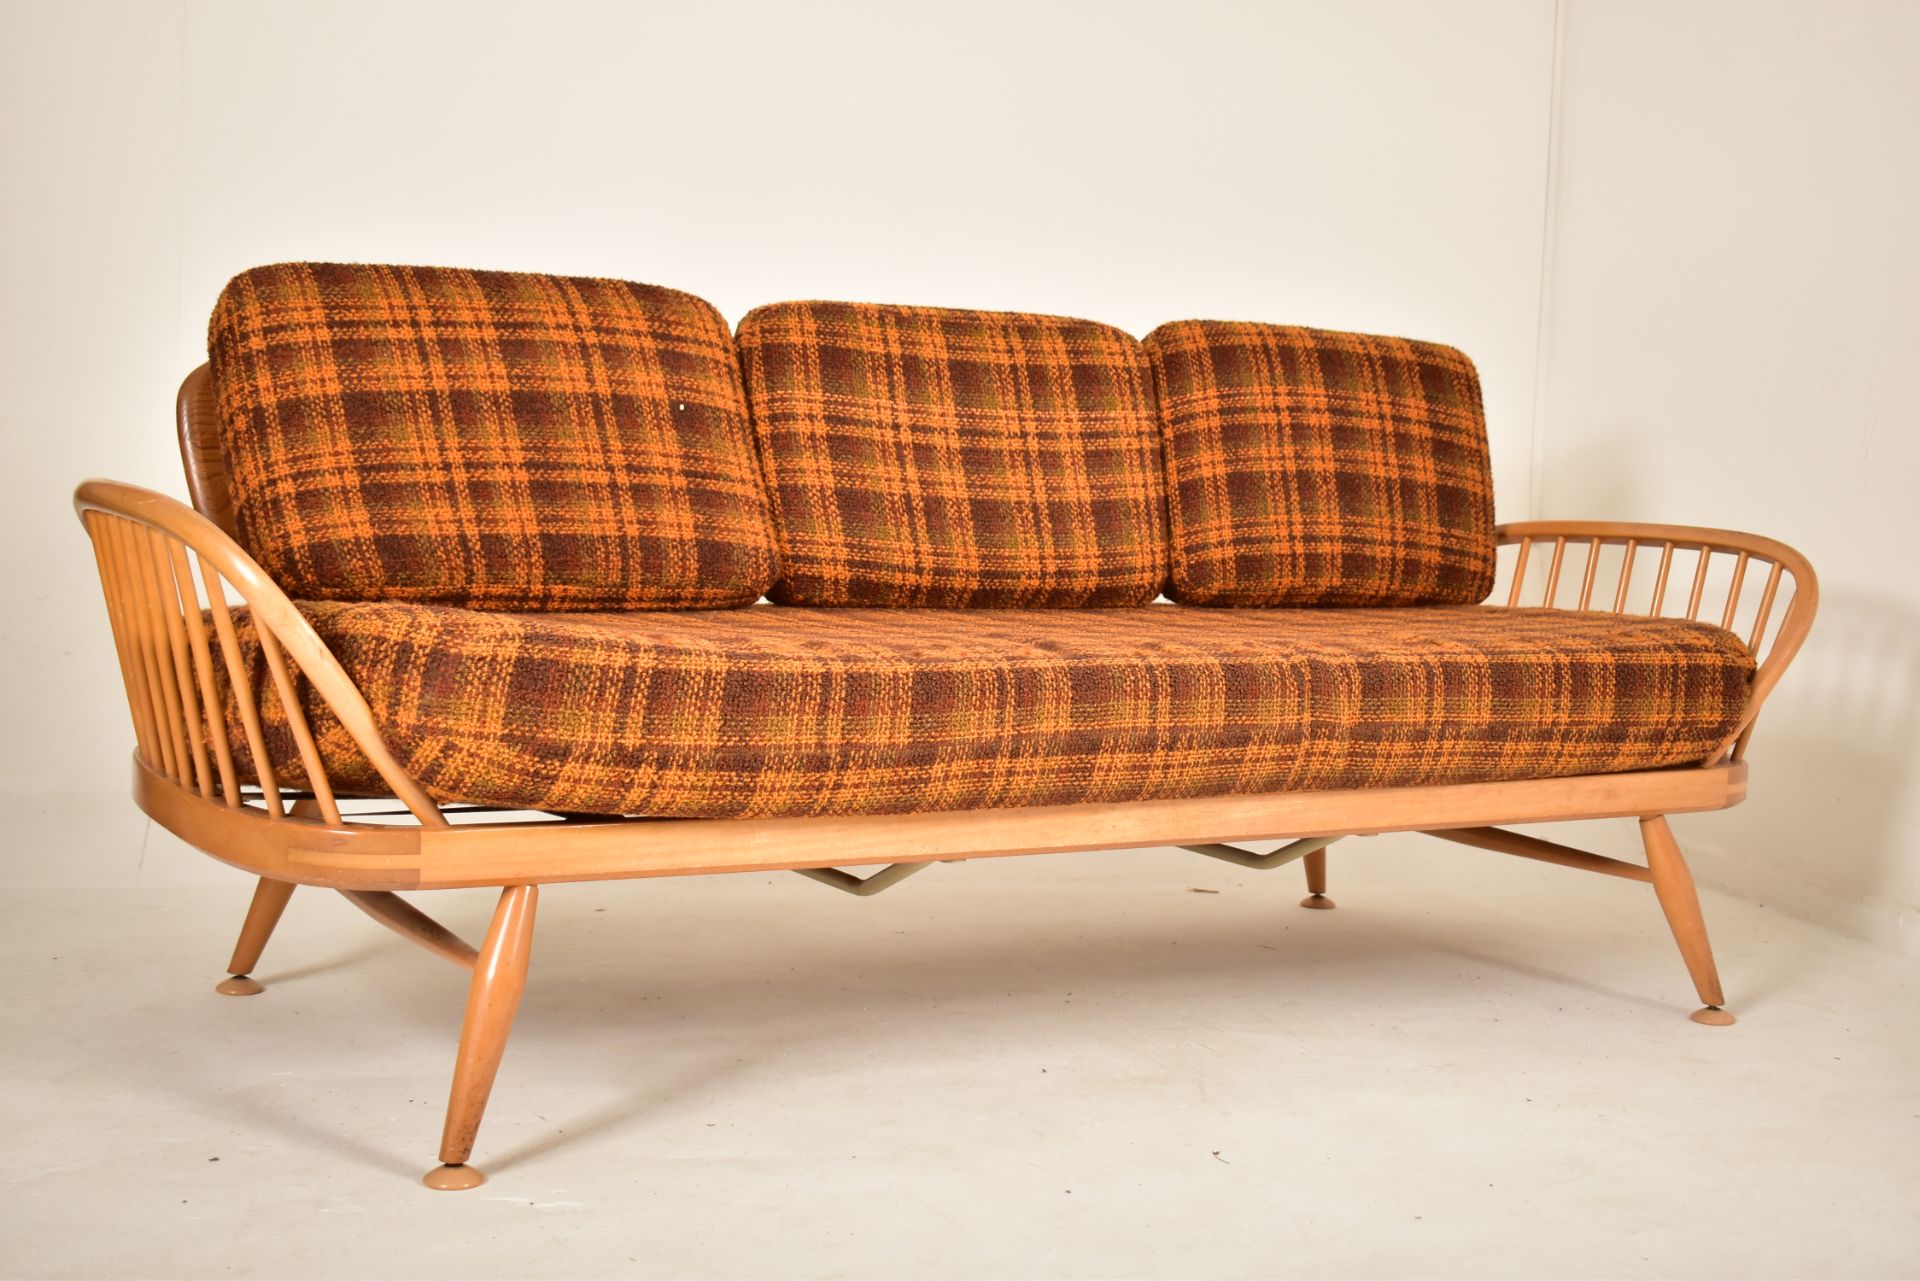 ERCOL - MODEL 355 - STUDIO COUCH - PAIR OF MID CENTURY DAYBEDS - Image 7 of 7